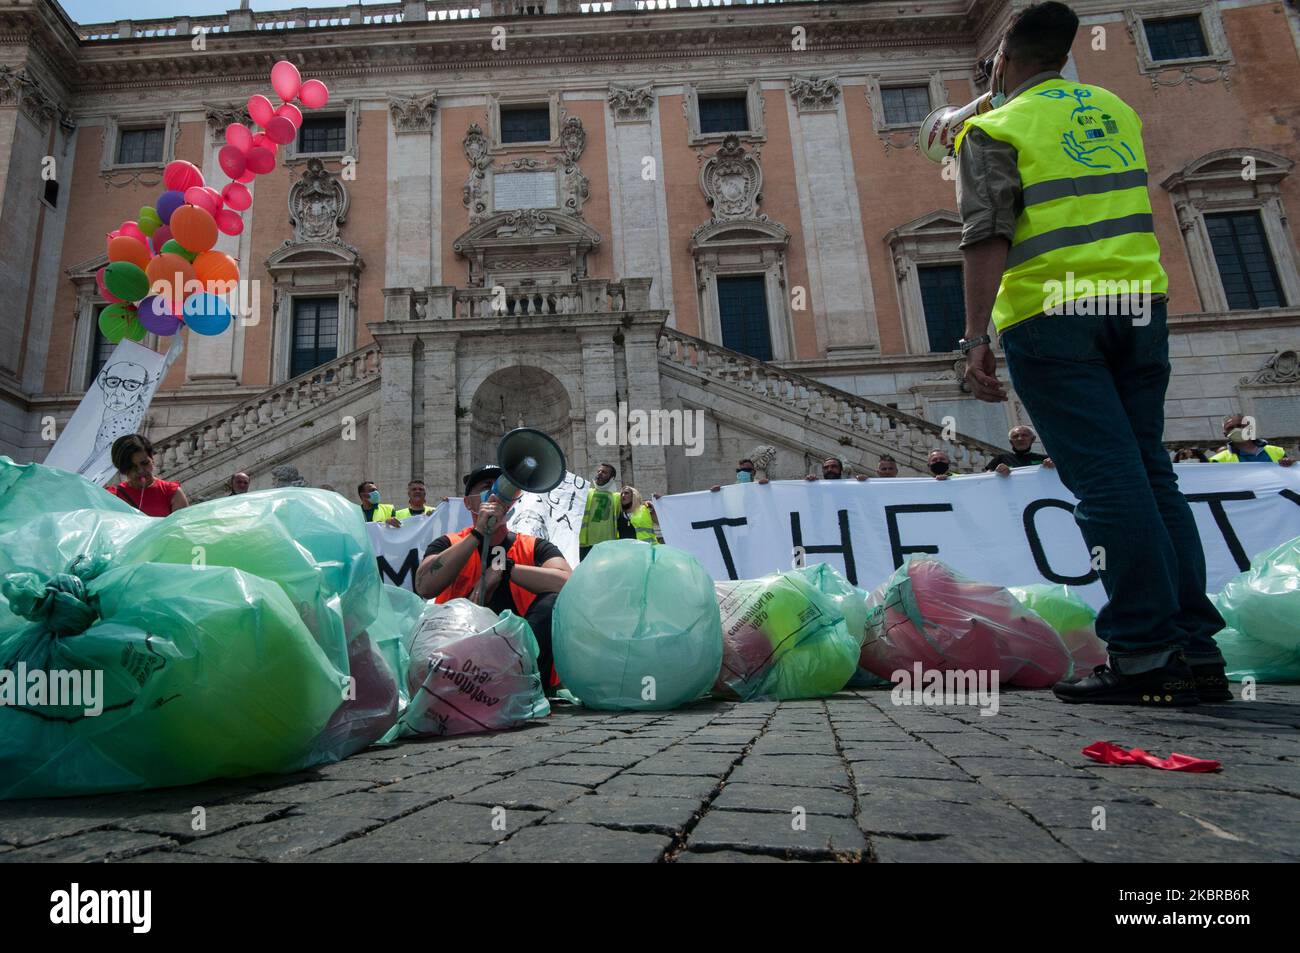 Workers of non-household users, a contract managed by Multiservizi, protest in Piazza del Campidoglio fake garbage bags on the square on June 18, 2020 in Rome , Italy. 'Welcome to Rome, the city of rubbish' the banner displayed by protesters. With the downsizing of the door-to-door service for non-household users by Ama, Multiservizi has left the contract and now 270 operators risk losing their jobs. (Photo by Andrea Ronchini/NurPhoto) Stock Photo